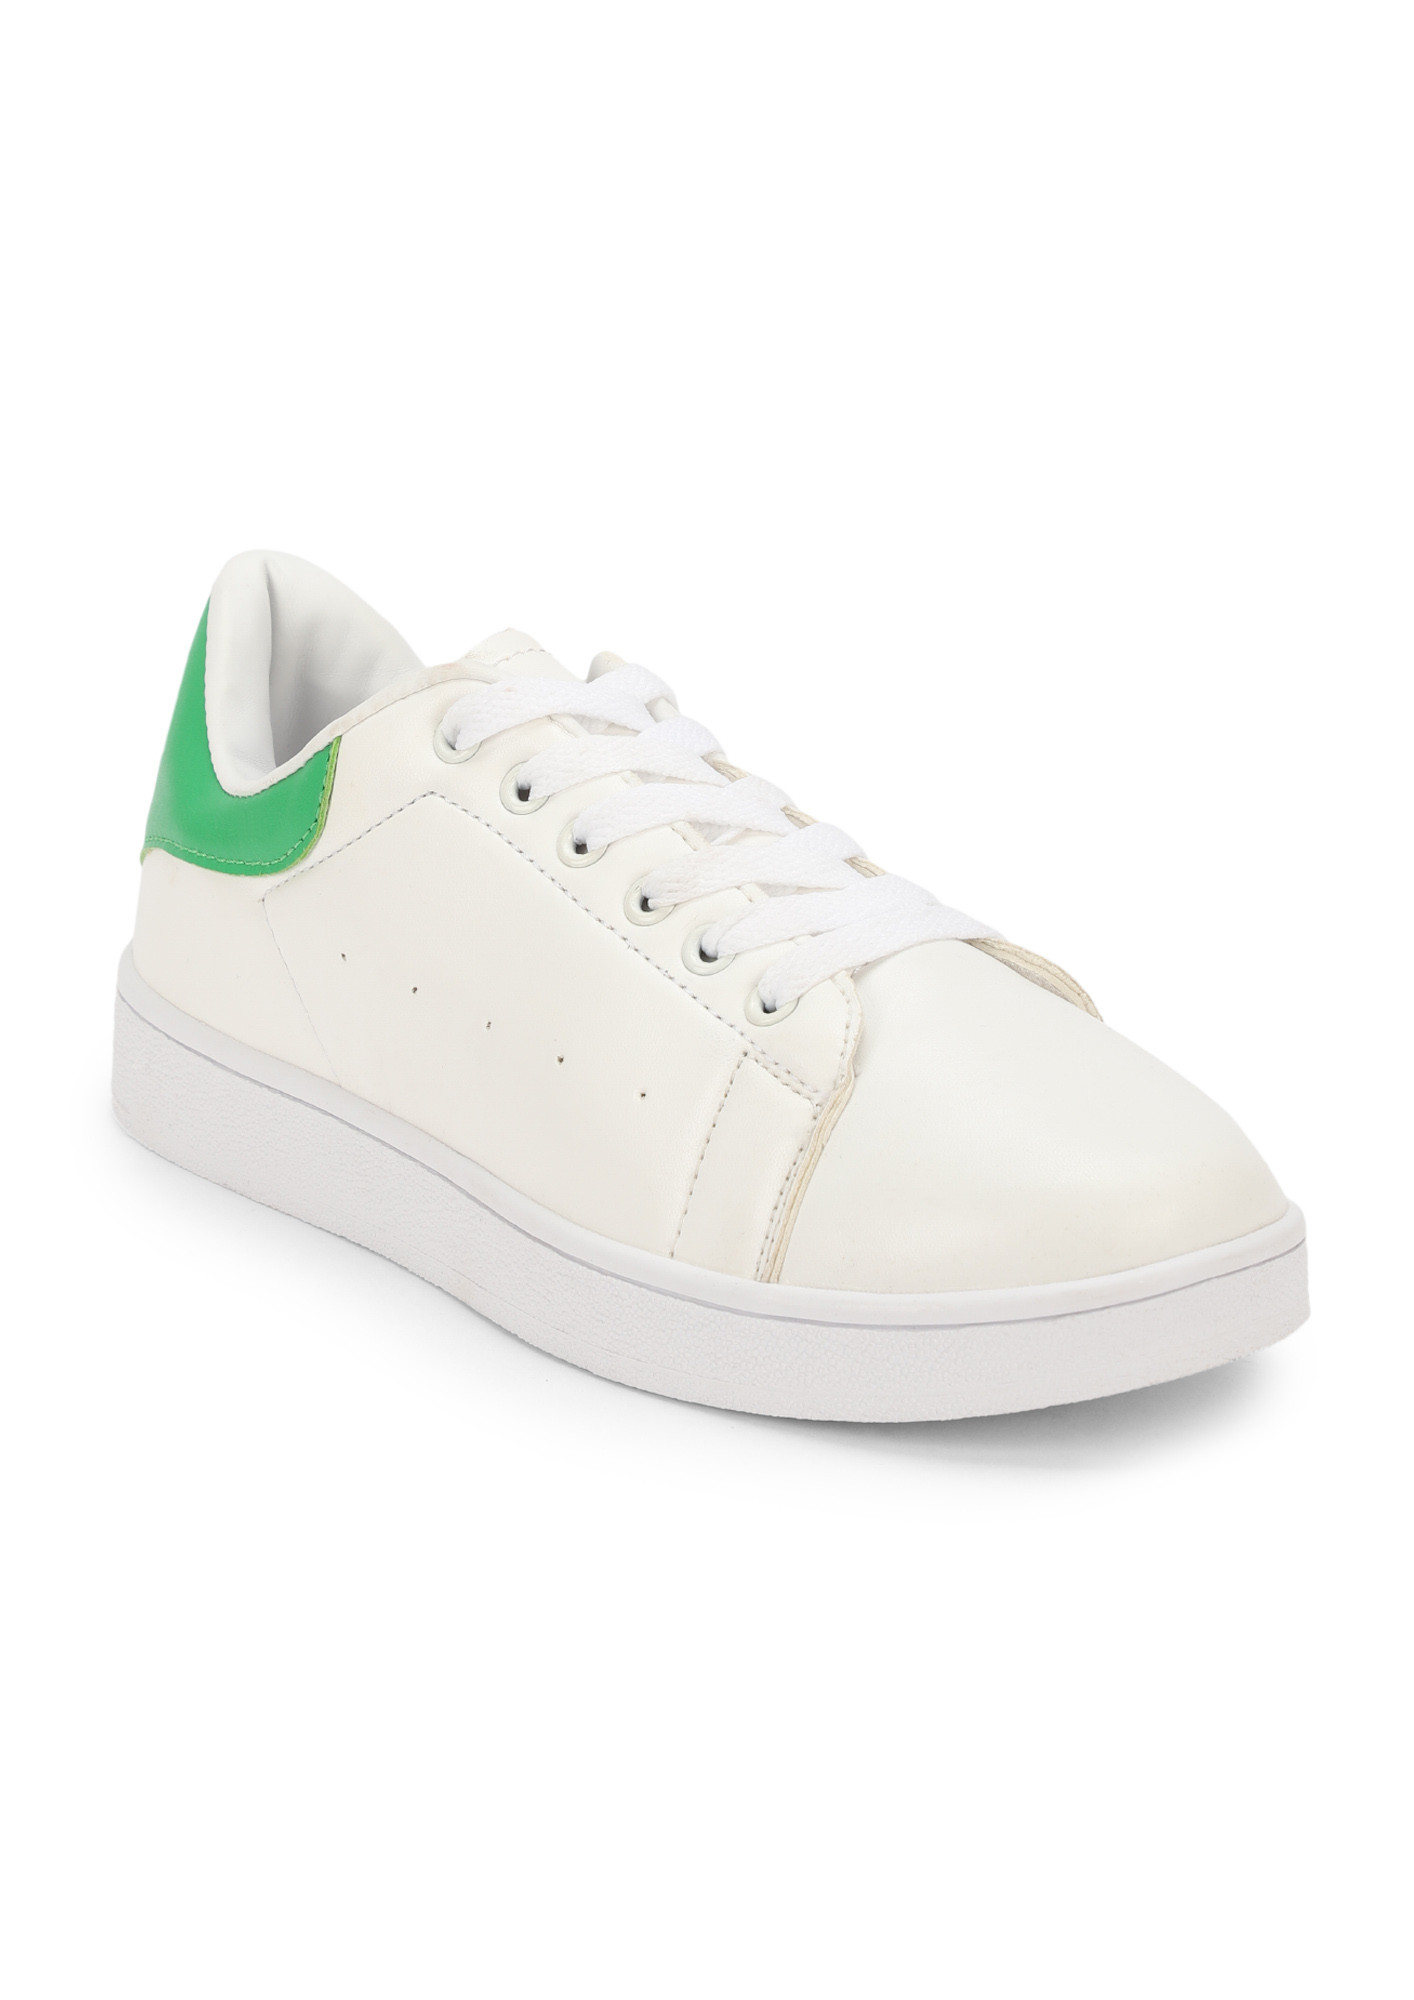 ADD SOME COLOR FOLKS GREEN TRAINERS